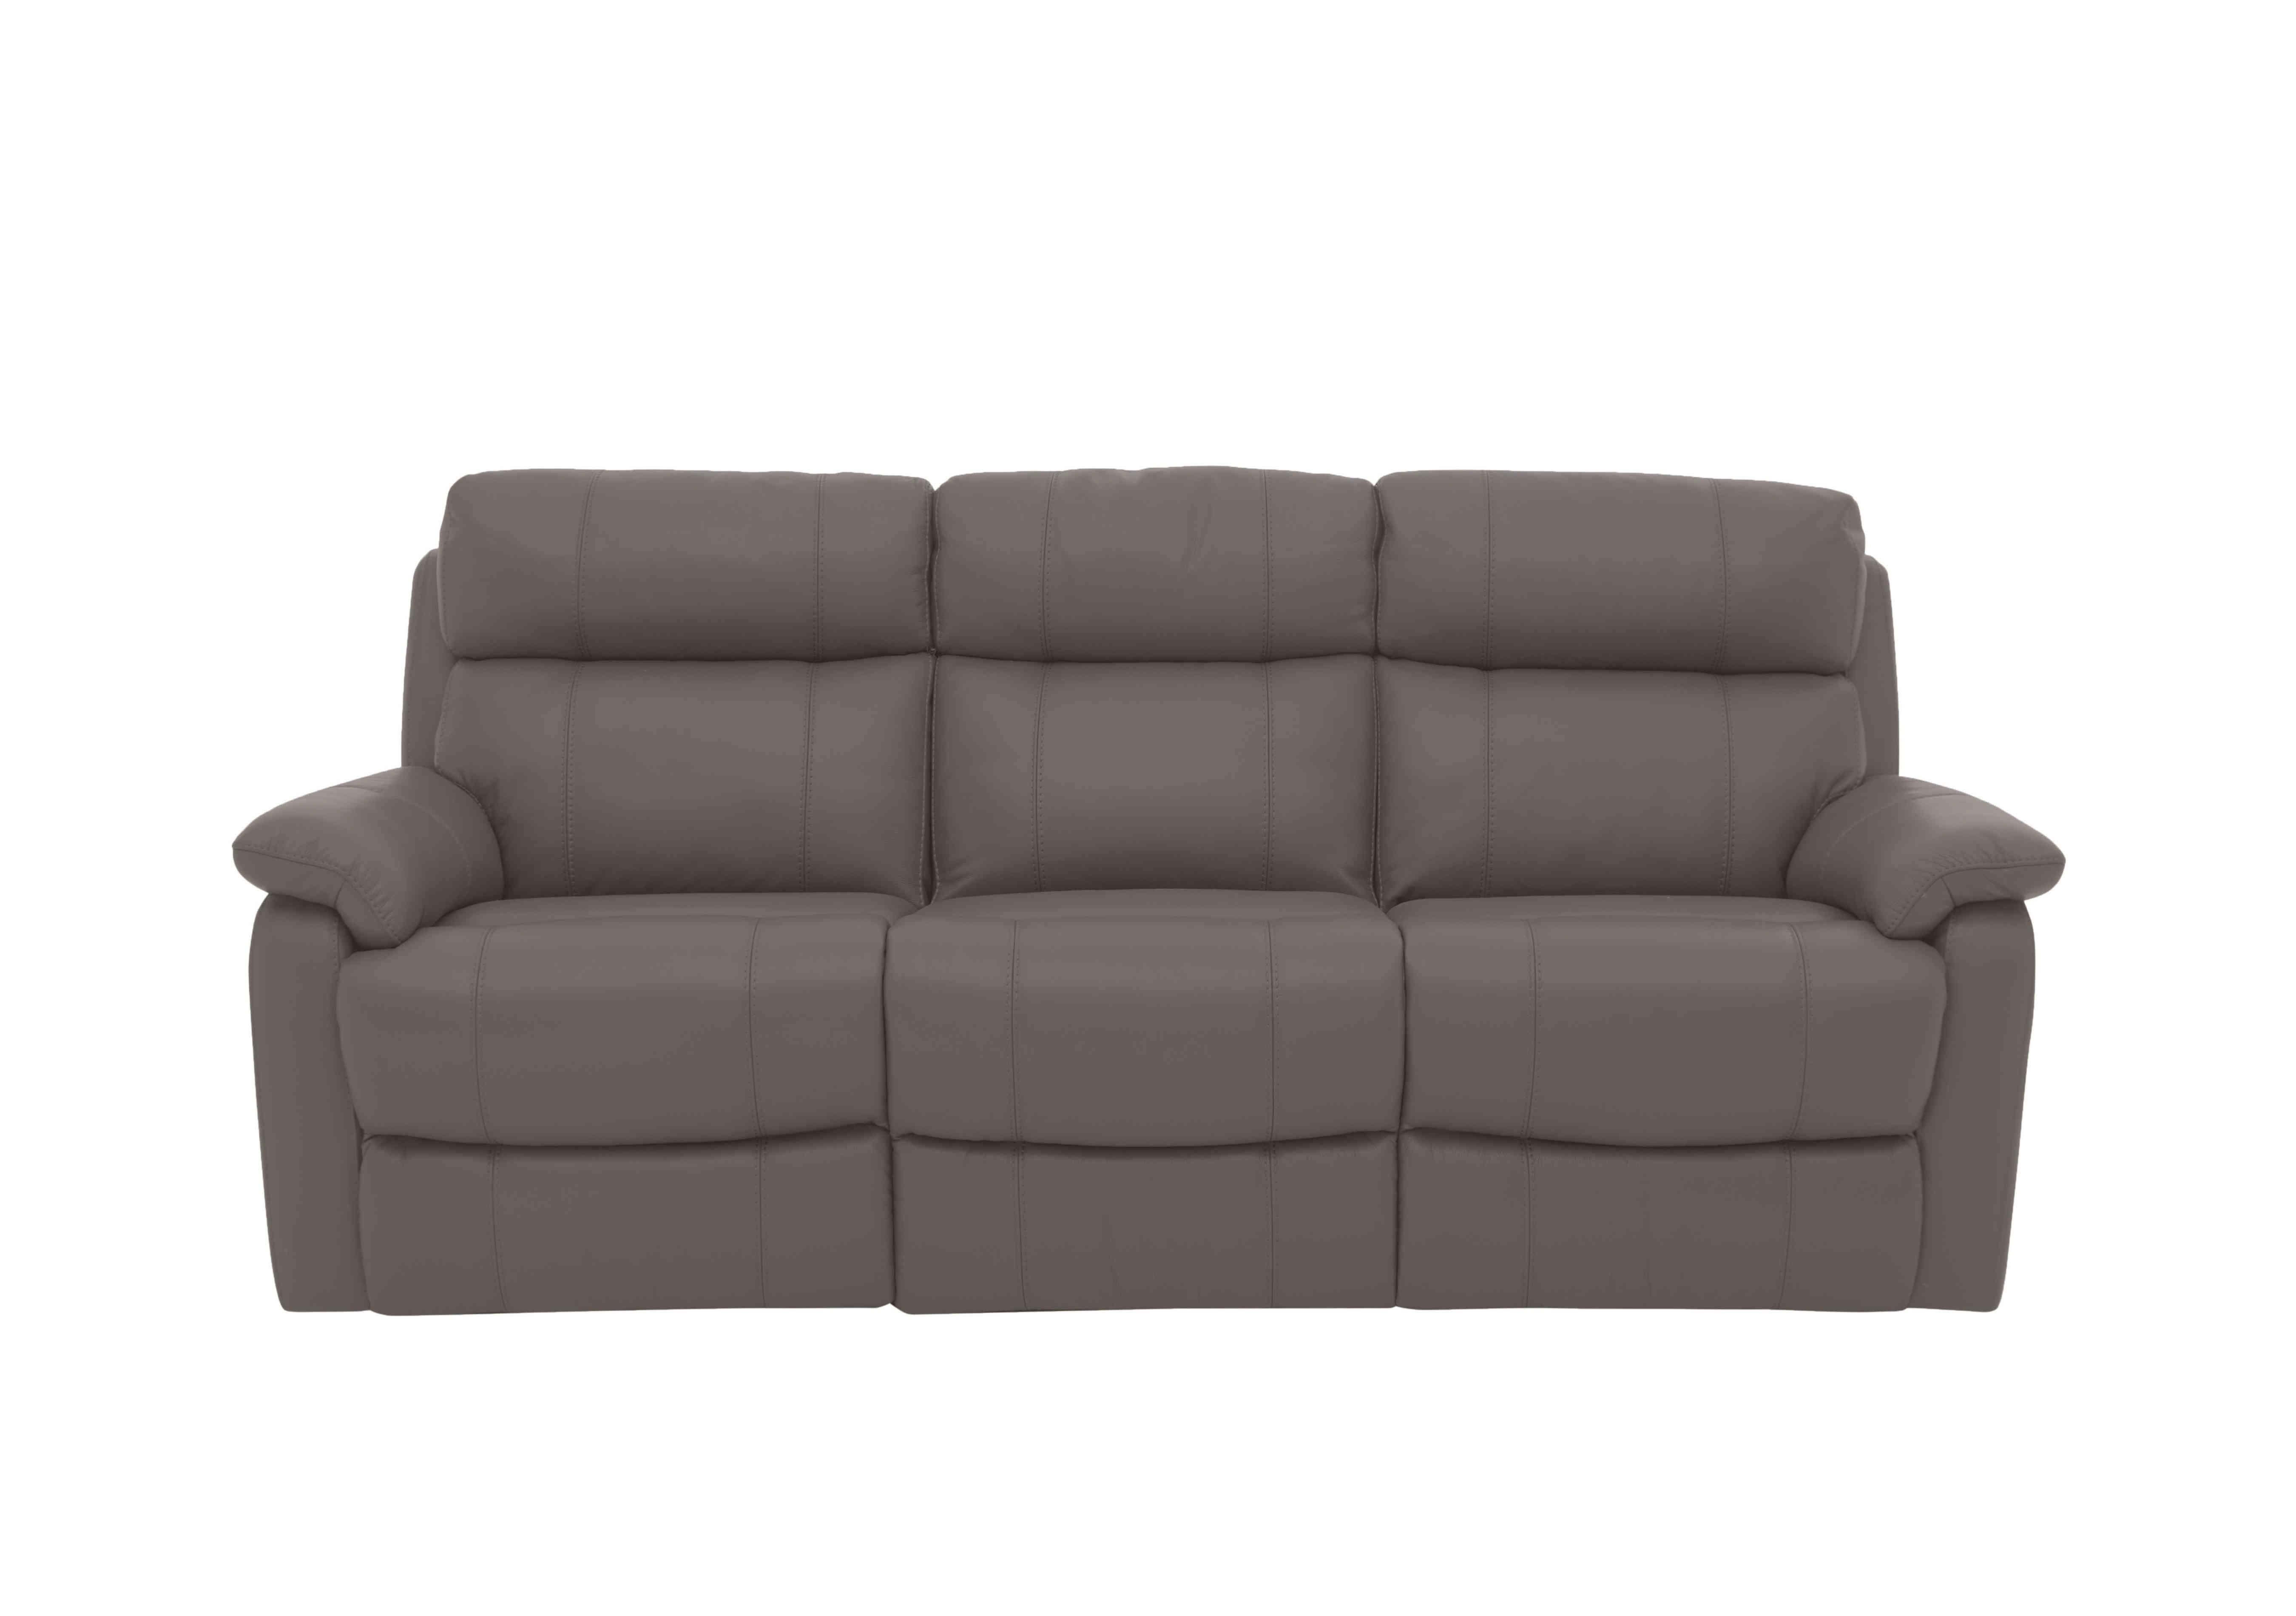 Relax Station Komodo 3 Seater Leather Sofa with Power Headrests and Cup Holders in Bv-042e Elephant on Furniture Village